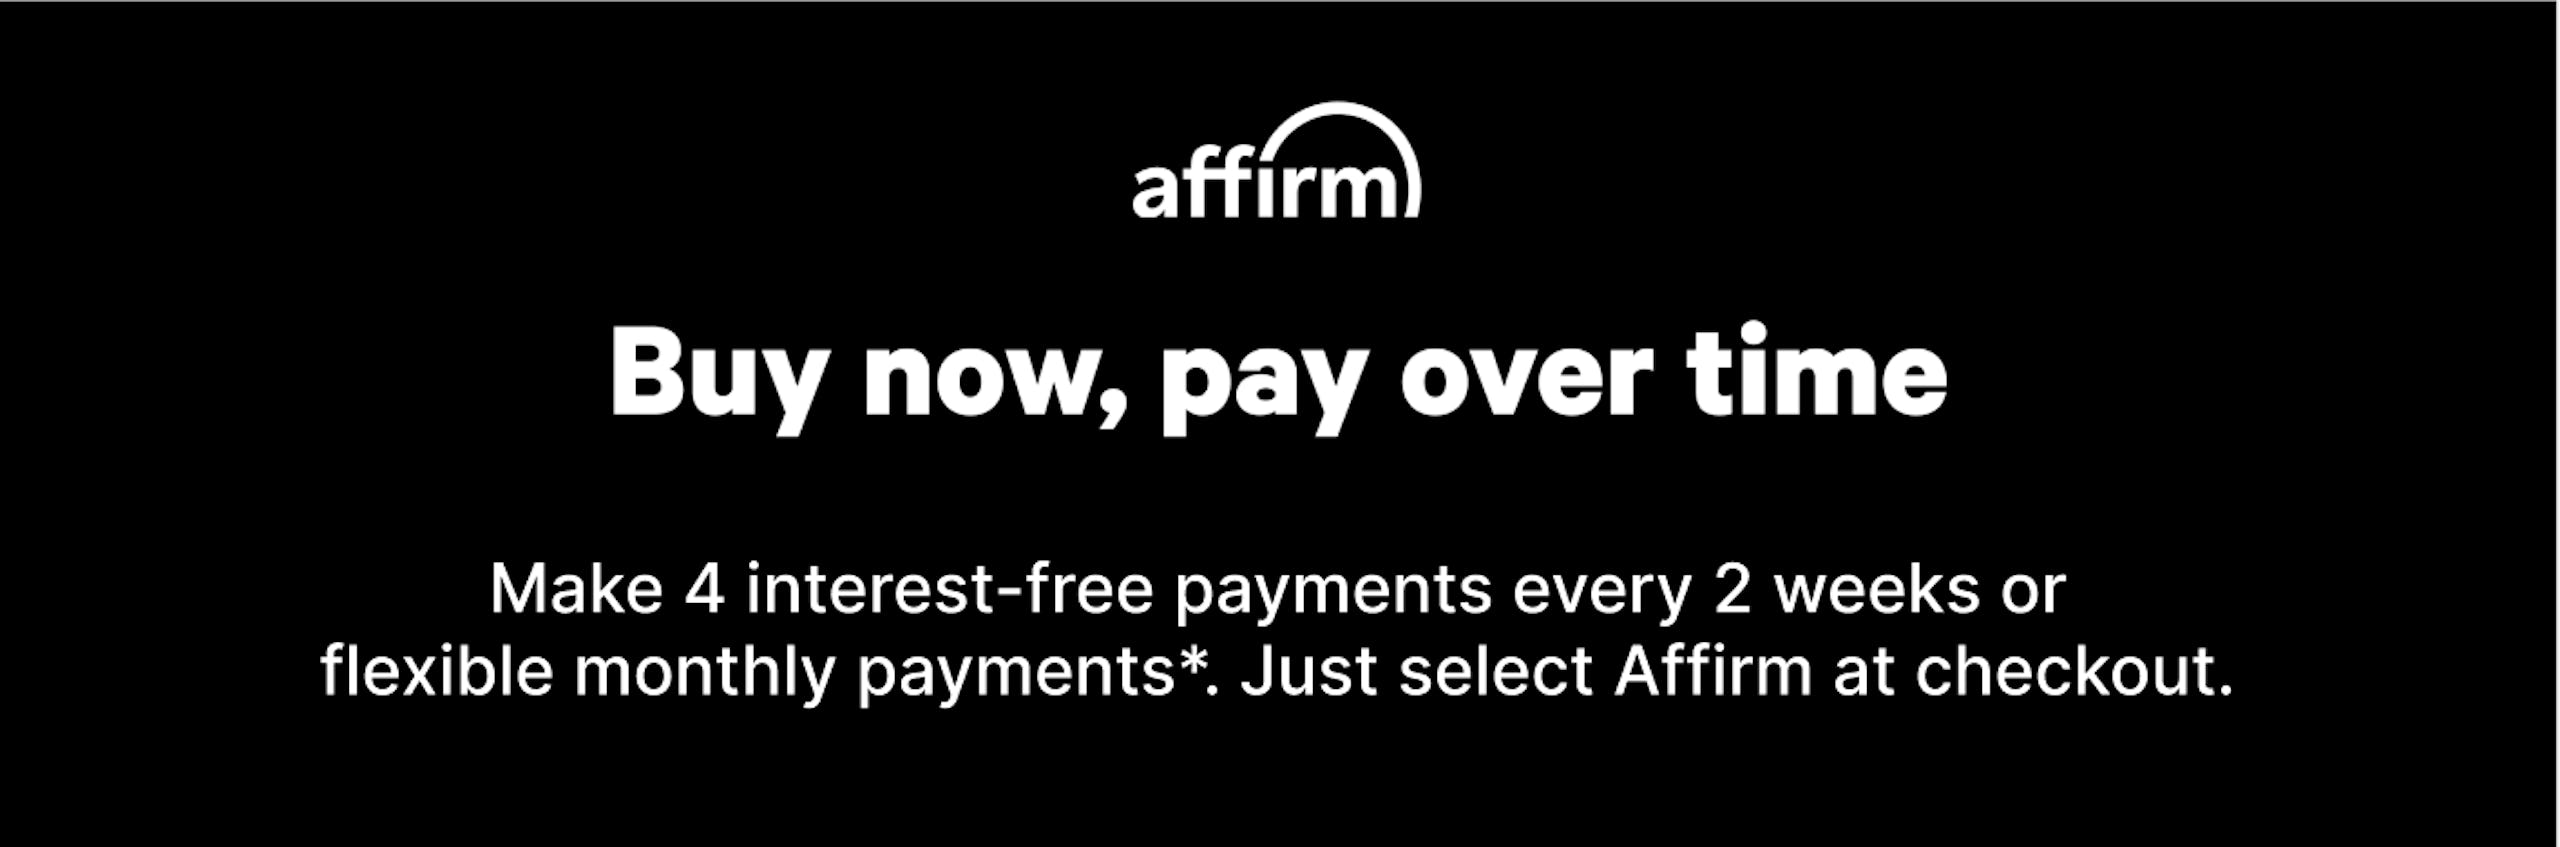 Black background with white text reads: Affirm logo | Buy now, pay over time | Make 4 interest free payments every 2 weeks or flexible monthly payments. Just select Affirm at checkout. 